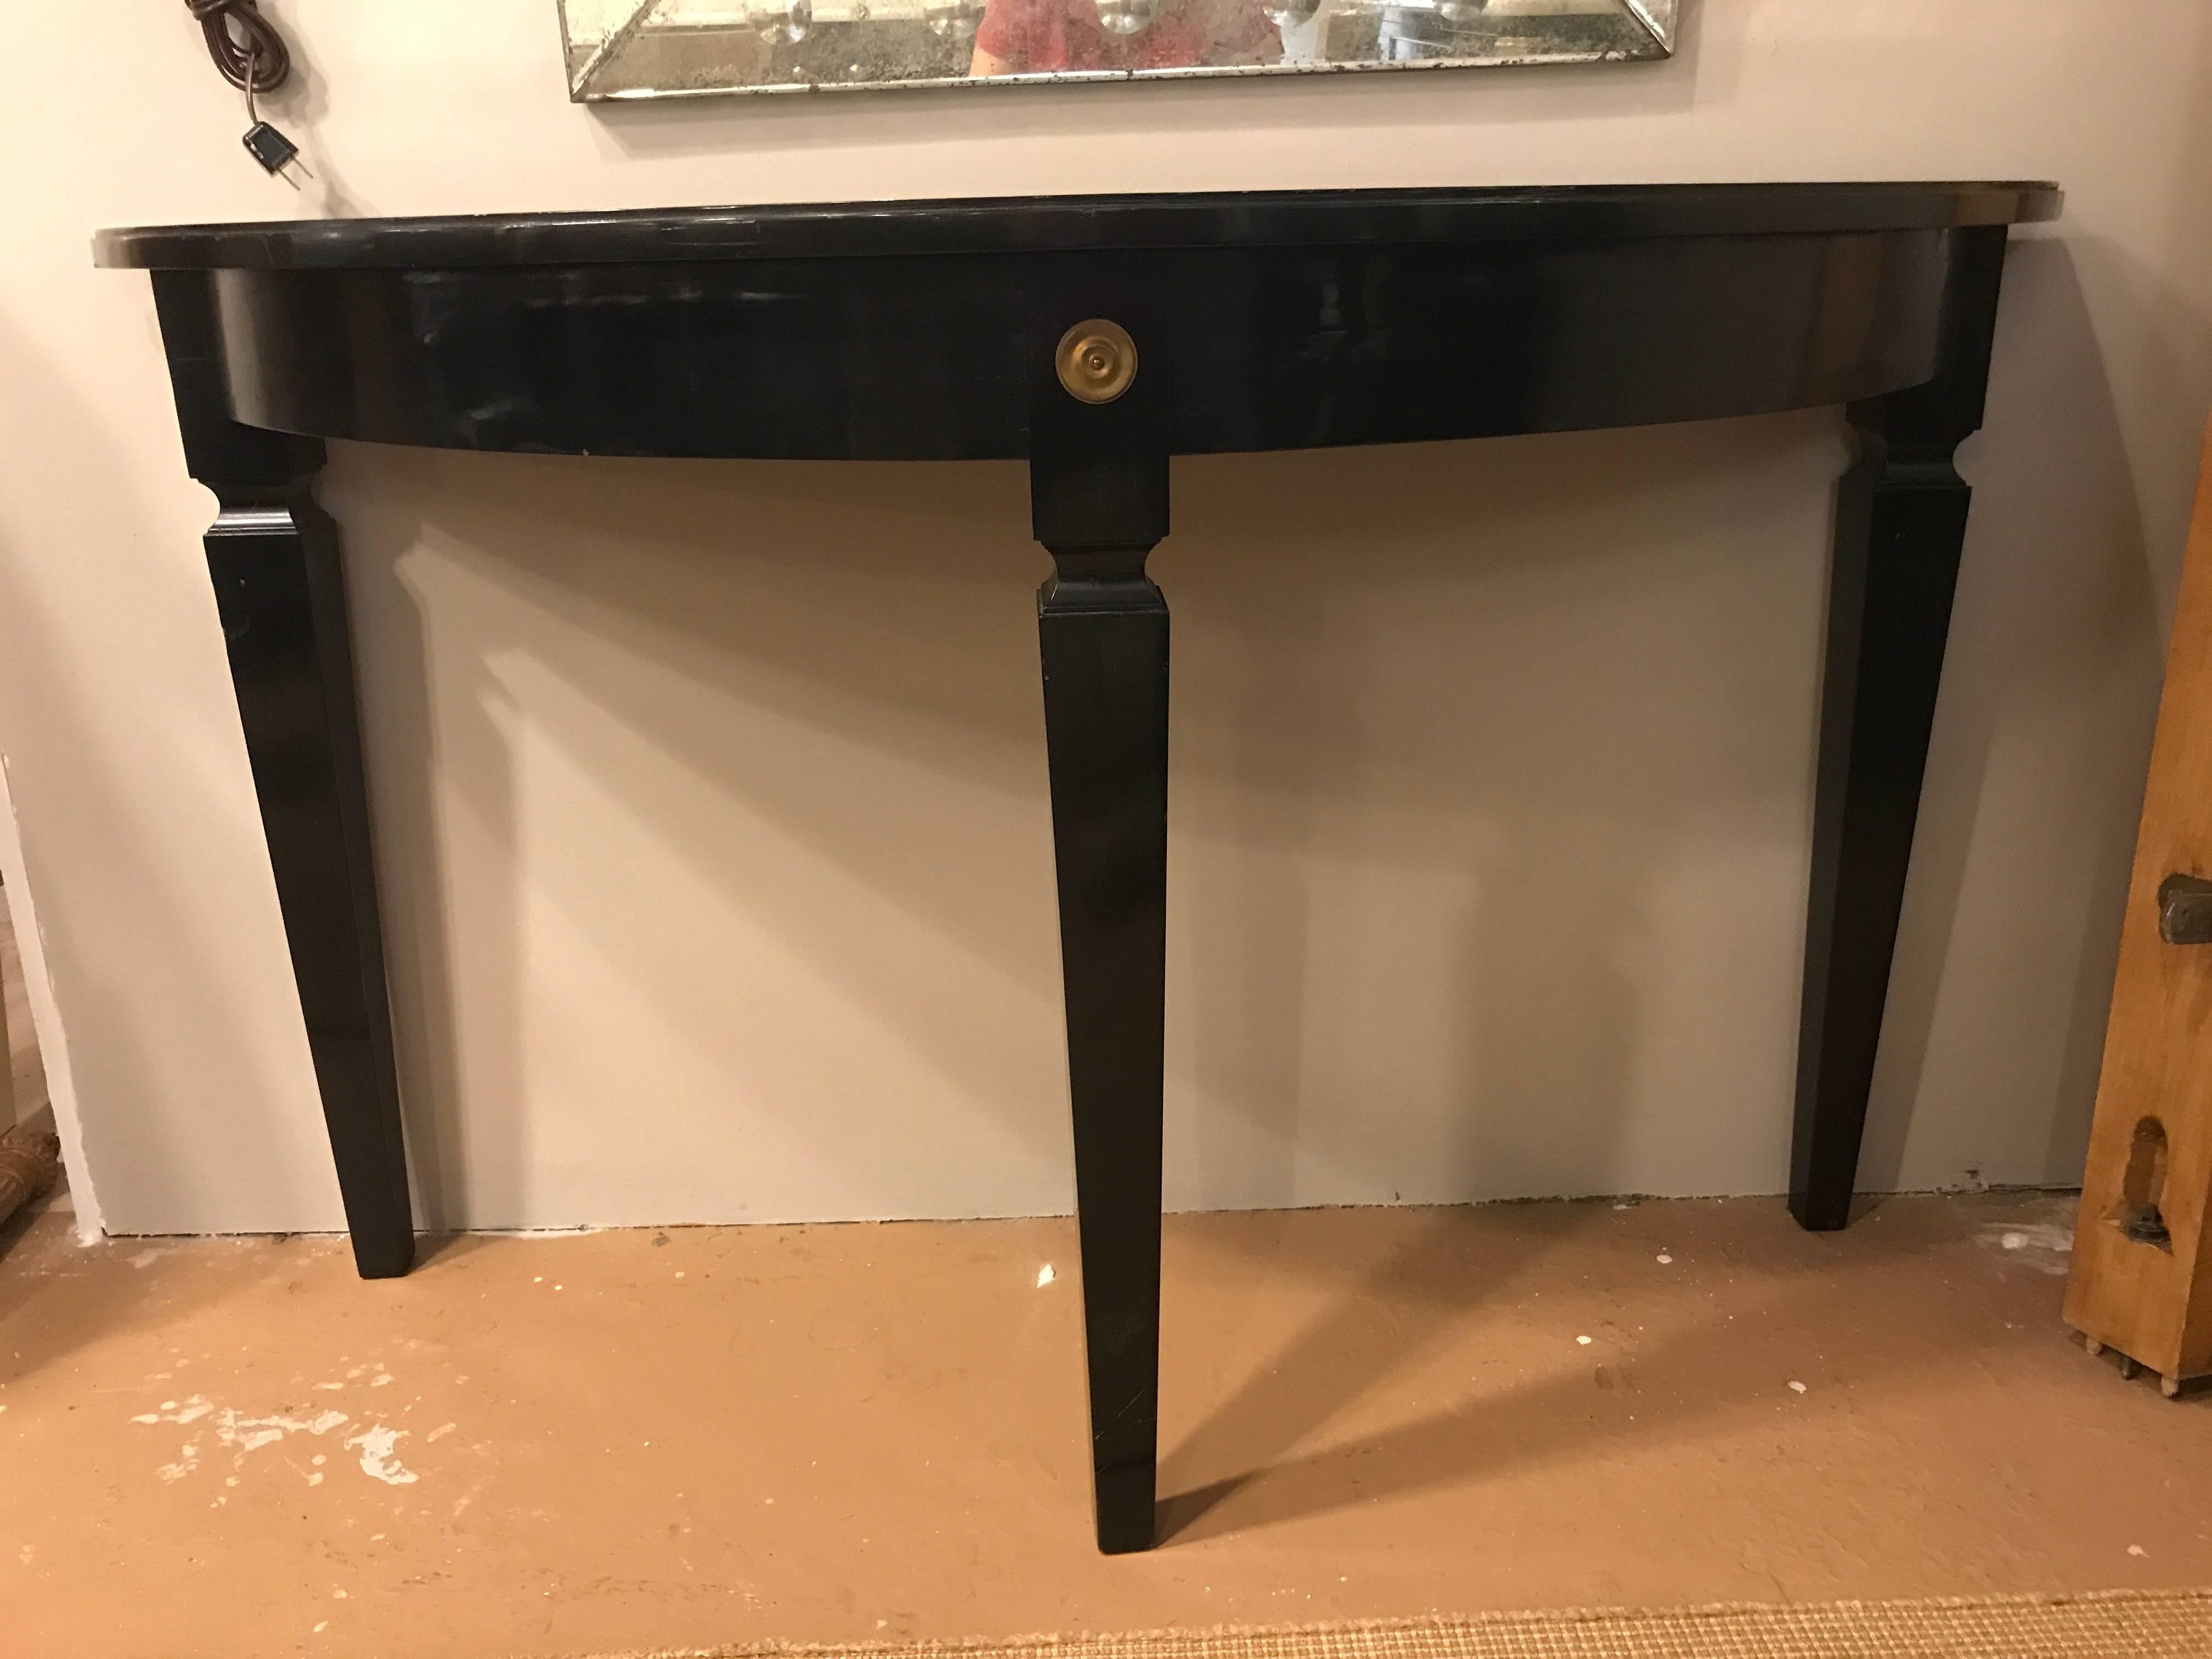 Églomiséd demilune console table by Maison Jansen. The ebonized base having long sleek tapering legs terminating in bronze circular decals. The base supporting a framed églomisé glass top of gold and silver design. This table showing the fine